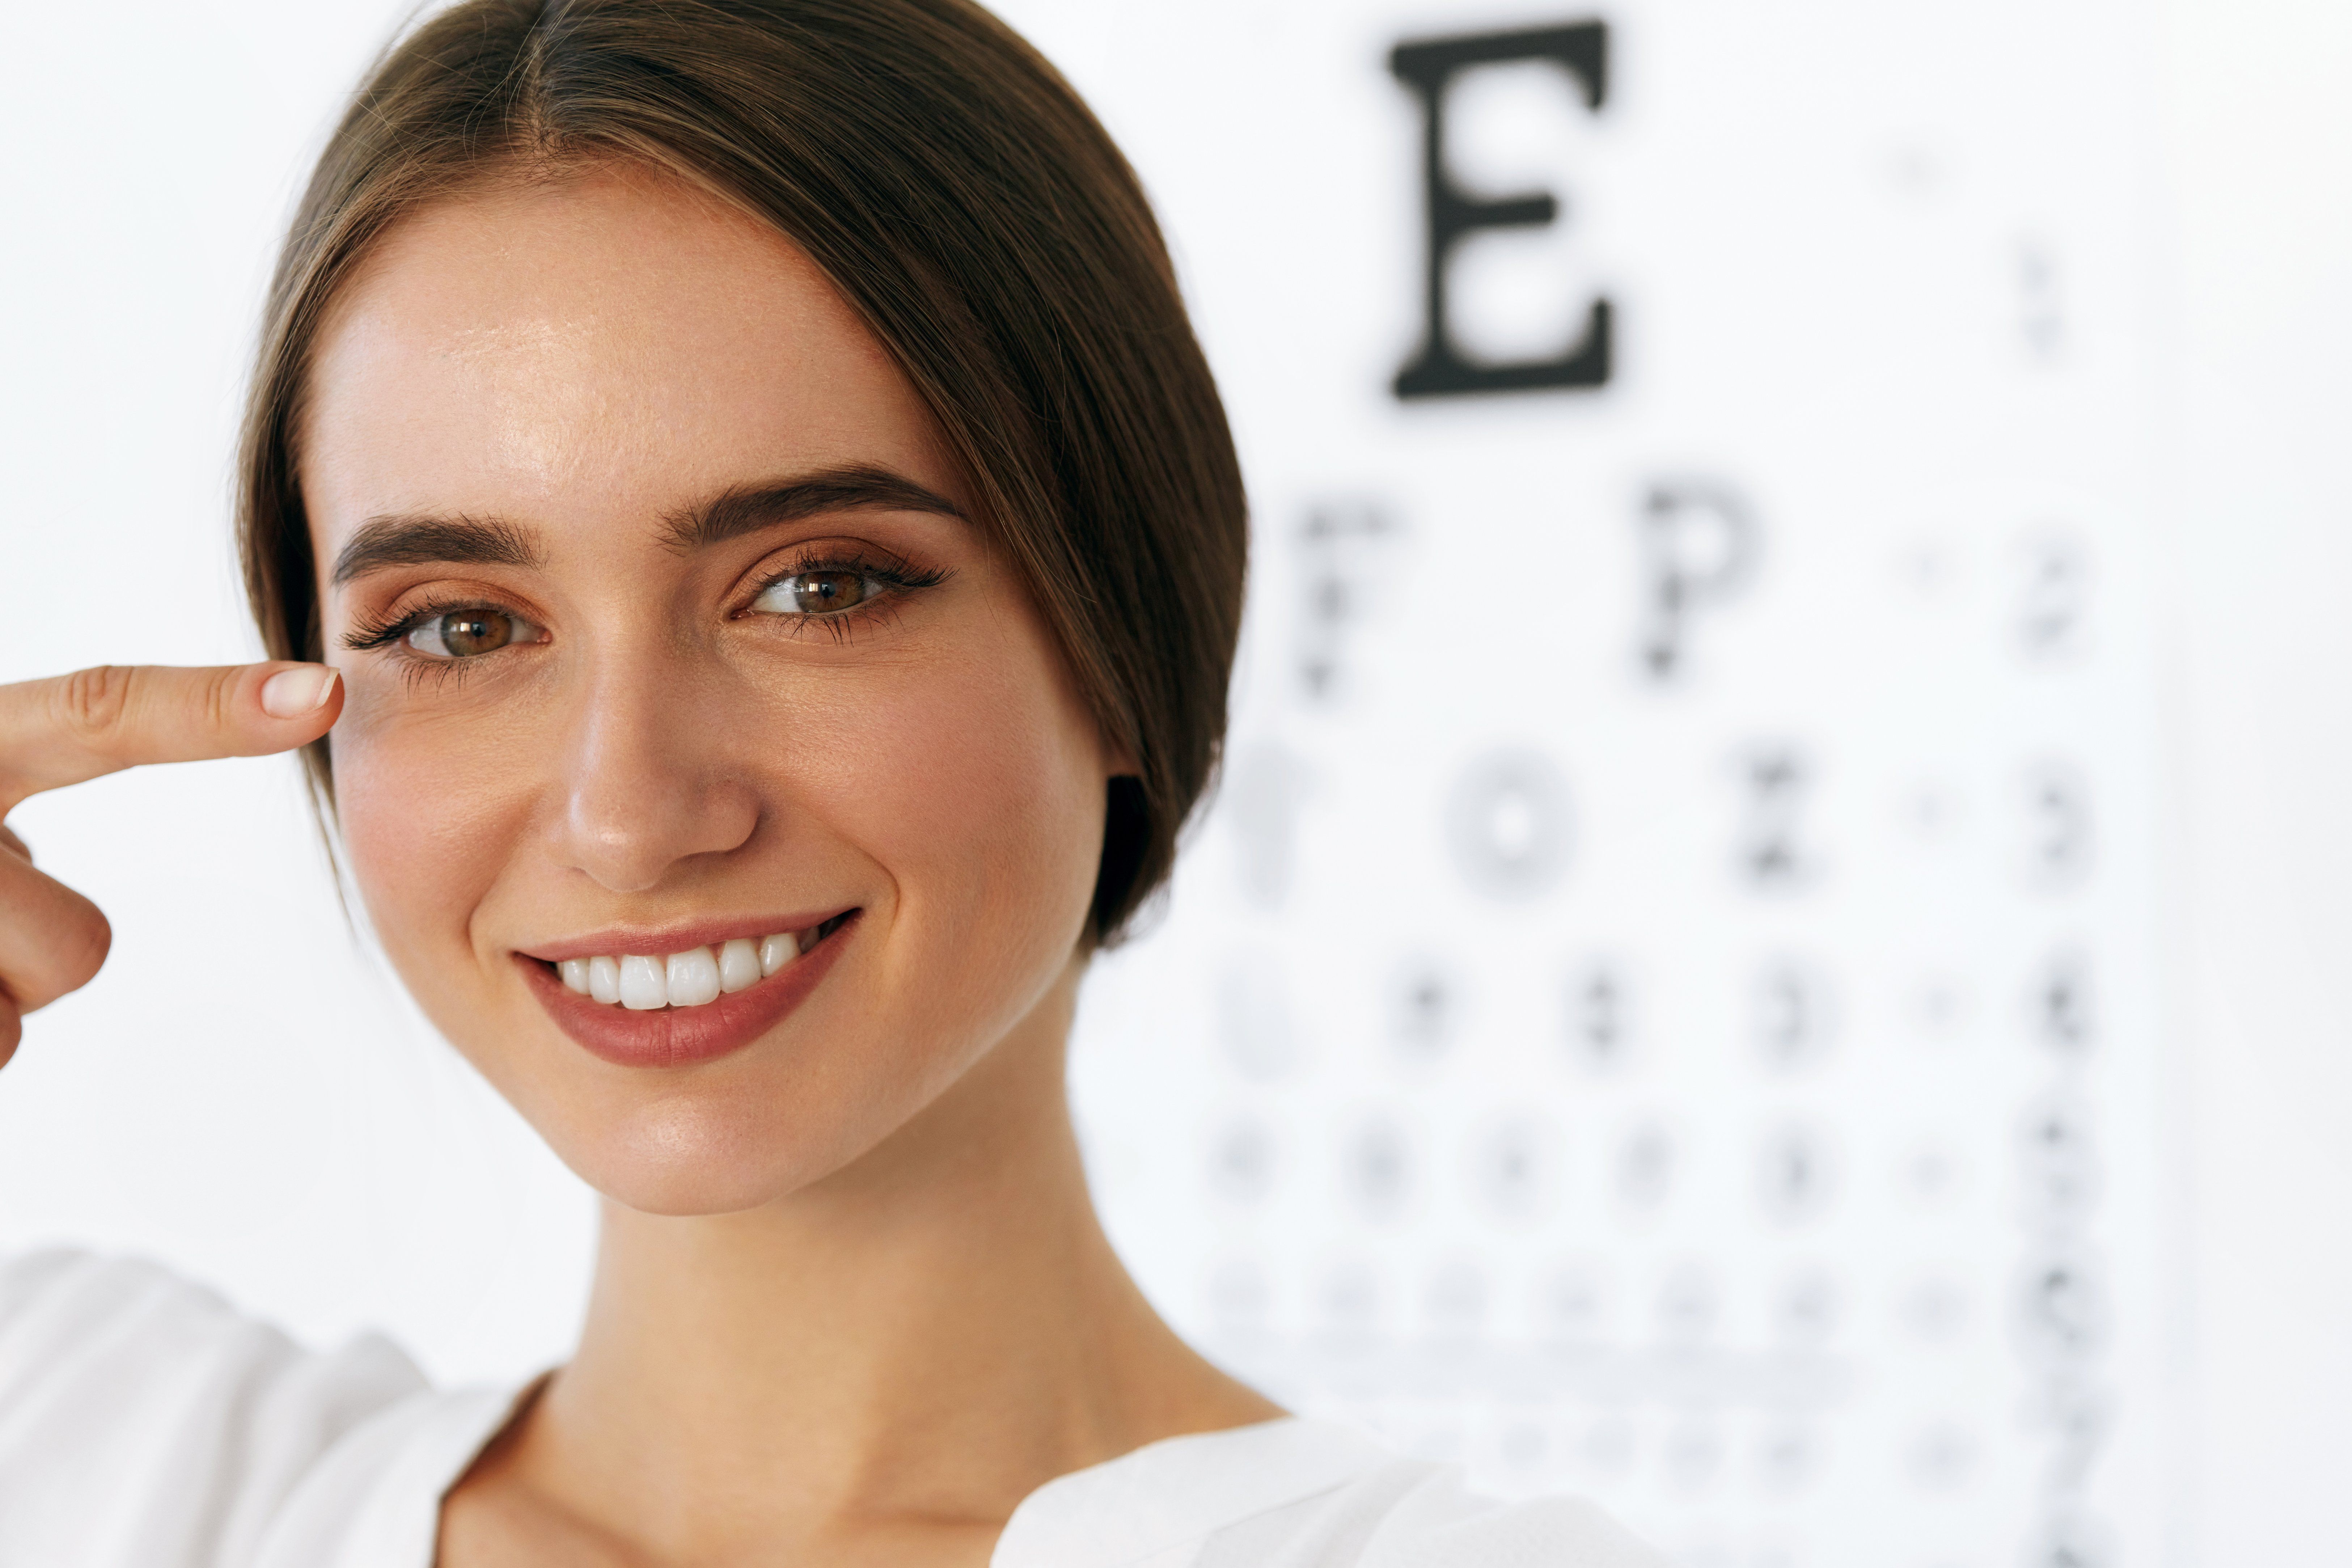 What Do Healthy Eyes Look Like?